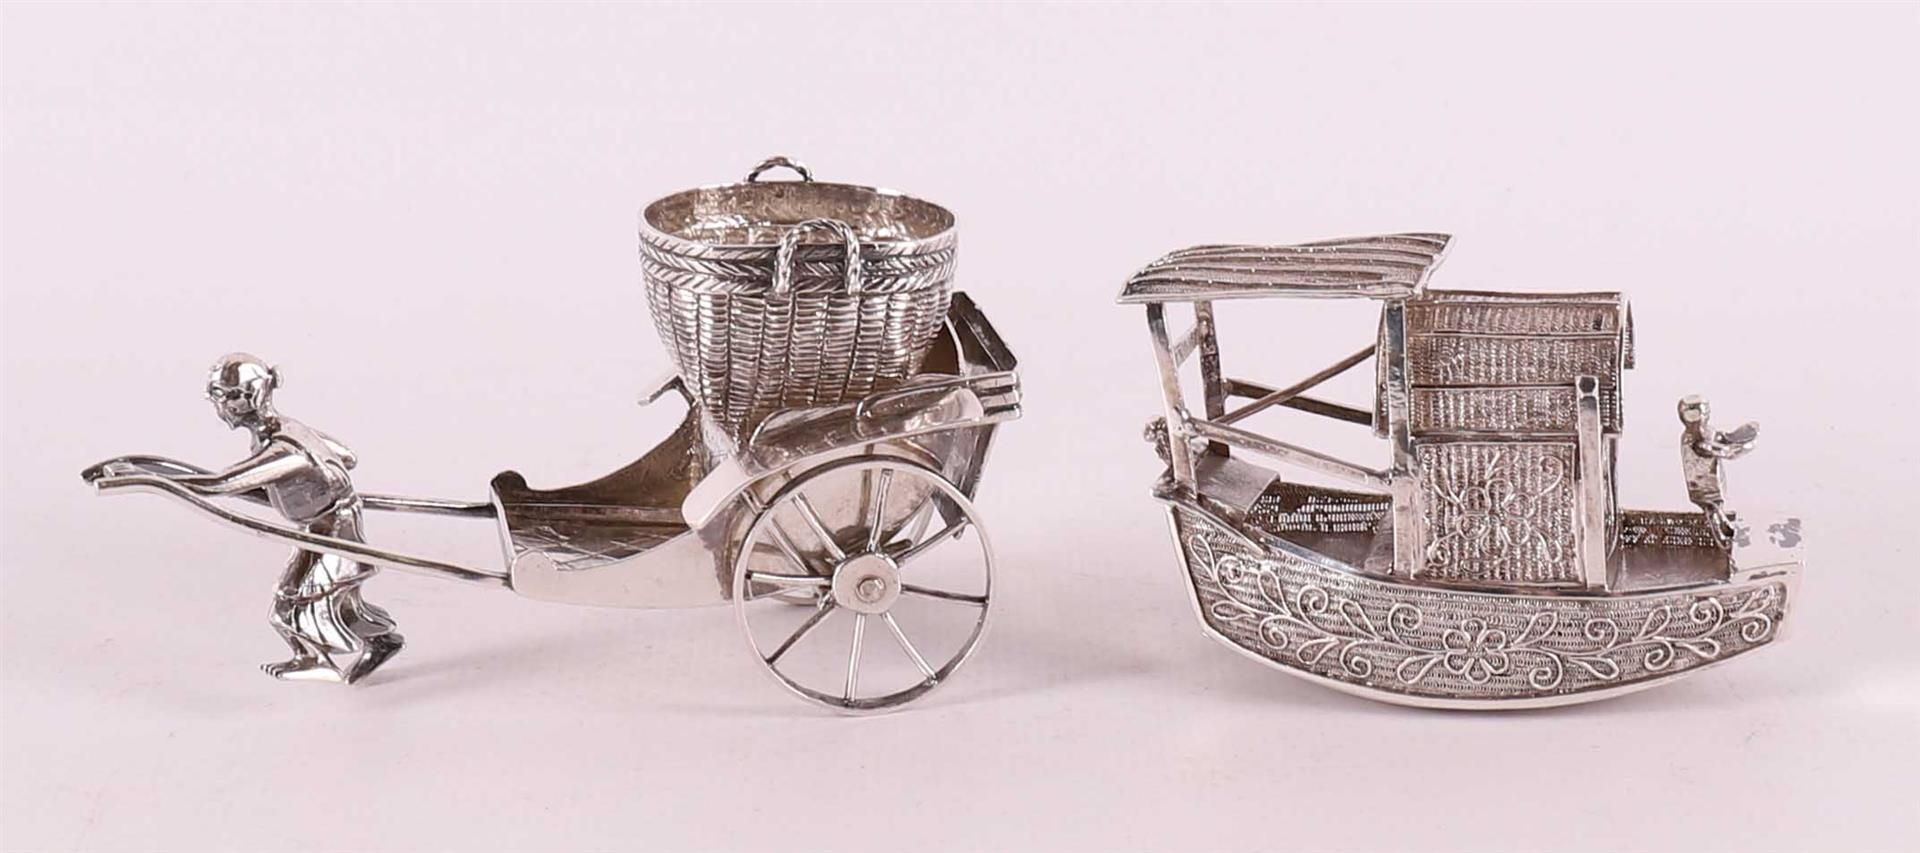 Etagere silver. A rickshaw with basket + boat, Indonesia, 20th century. - Image 2 of 3